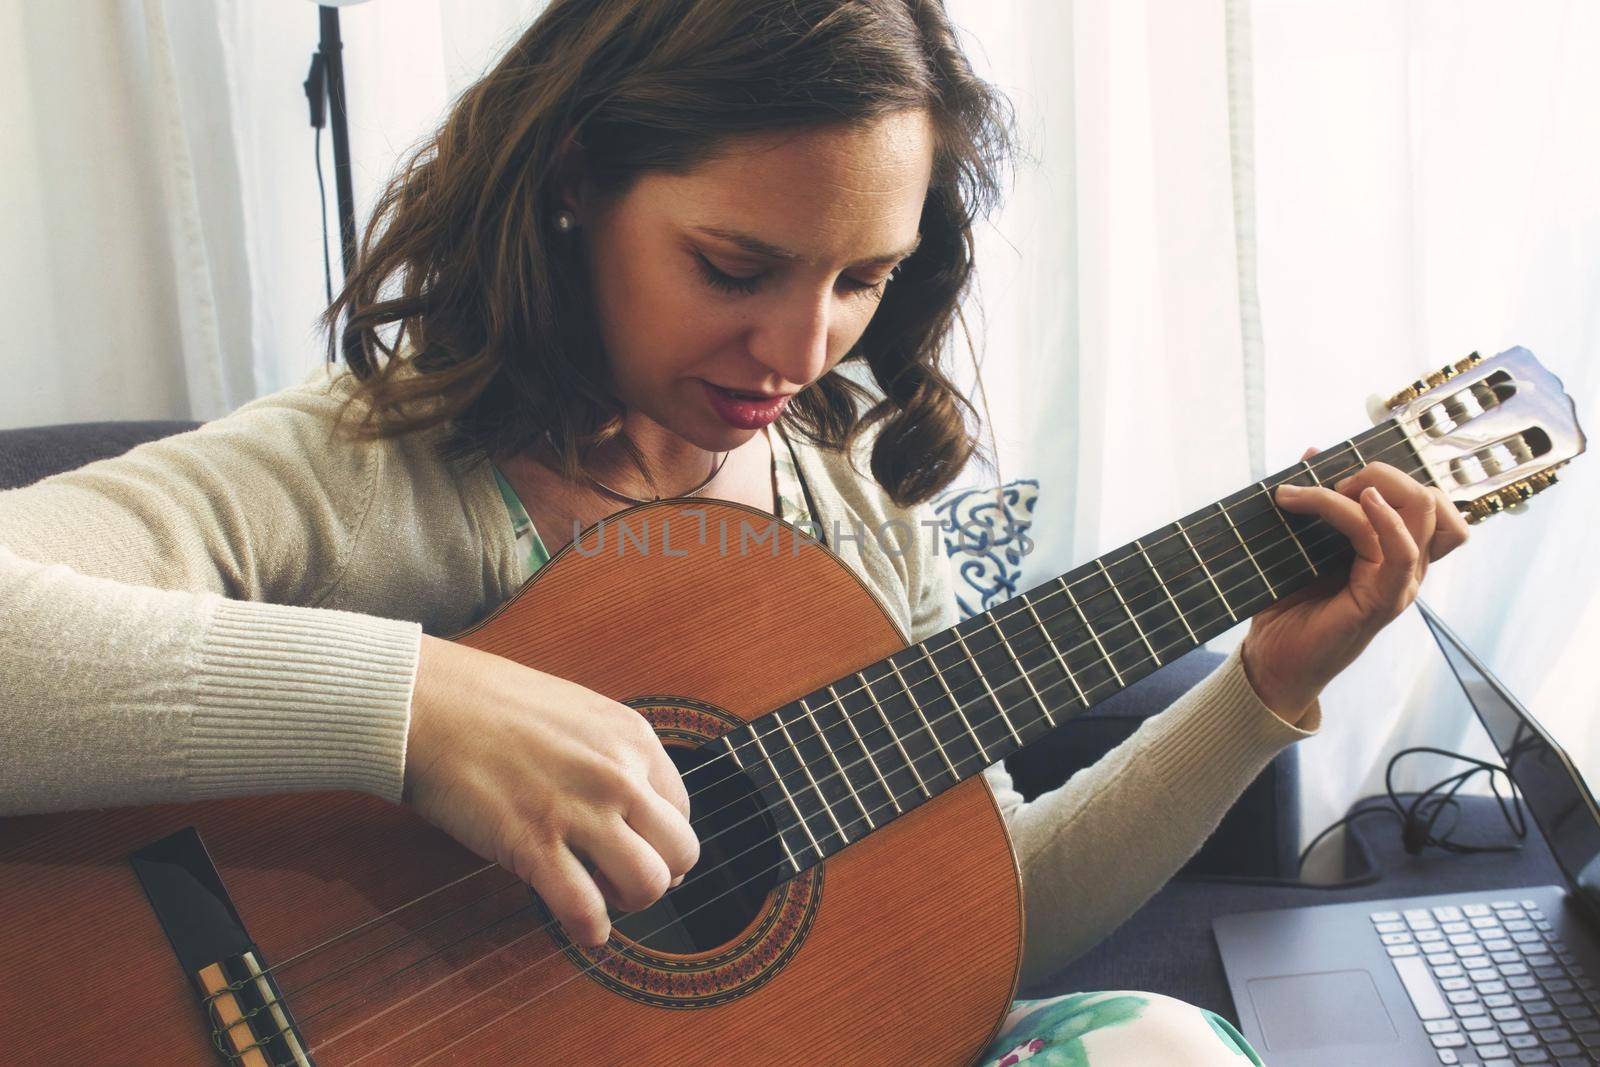 Attractive young lady playing and recording music using a Spanish classical guitar and a laptop